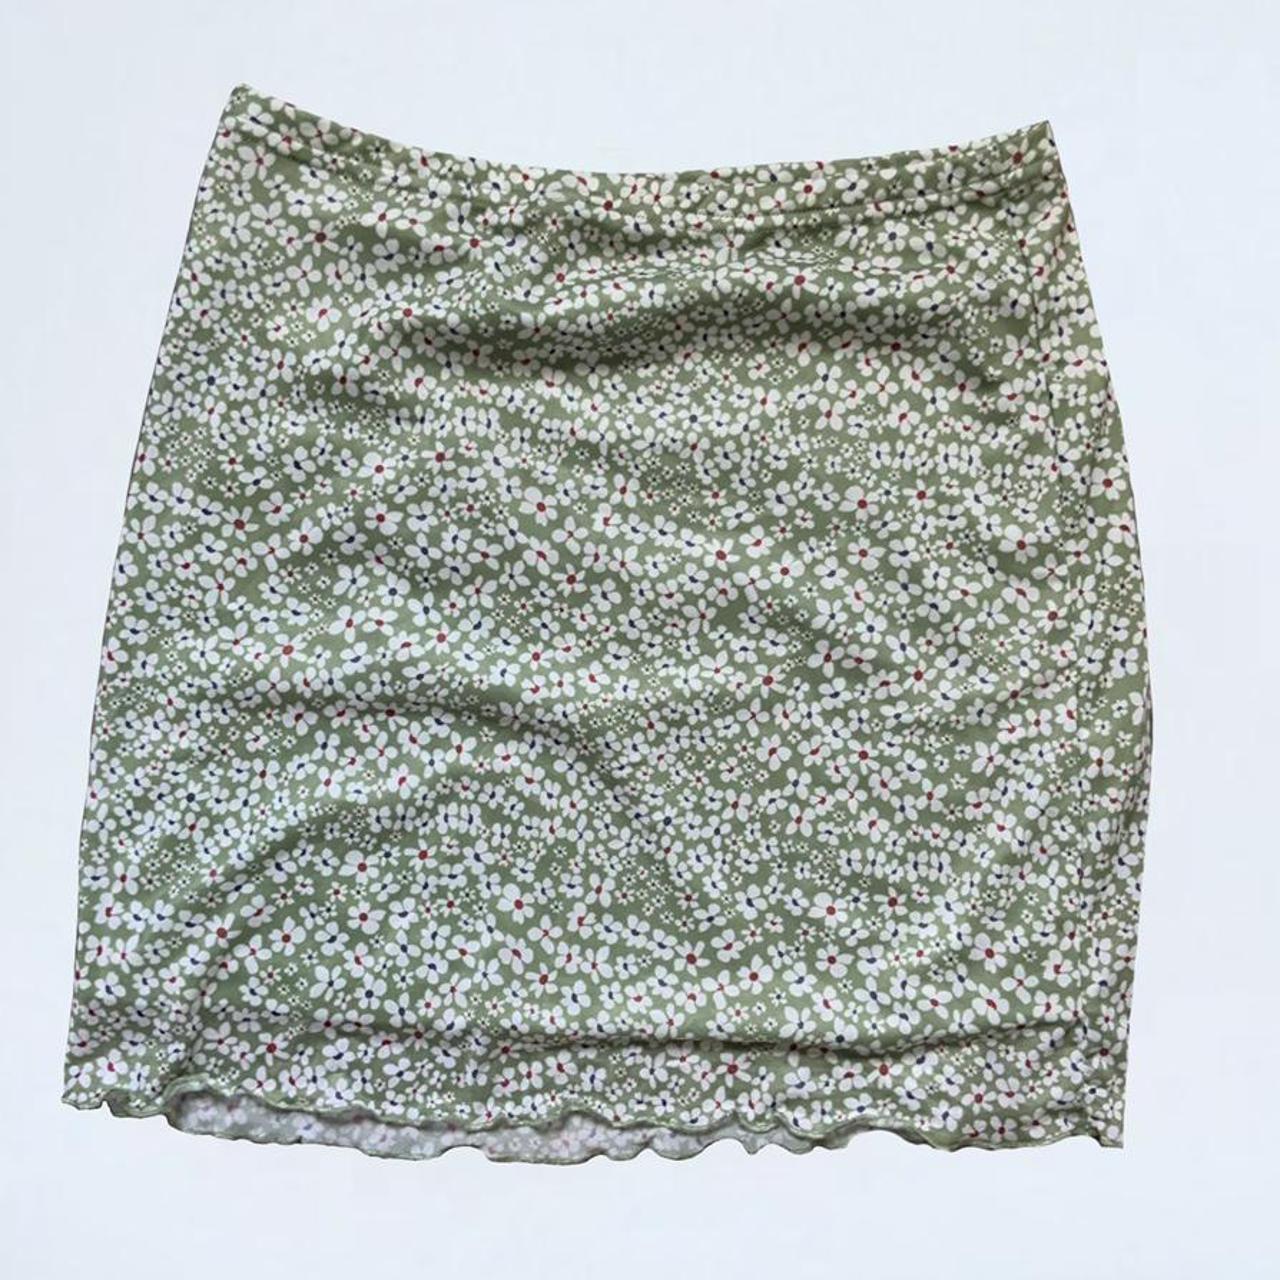 Product Image 2 - Super cute floral skirt 🤍
Size: